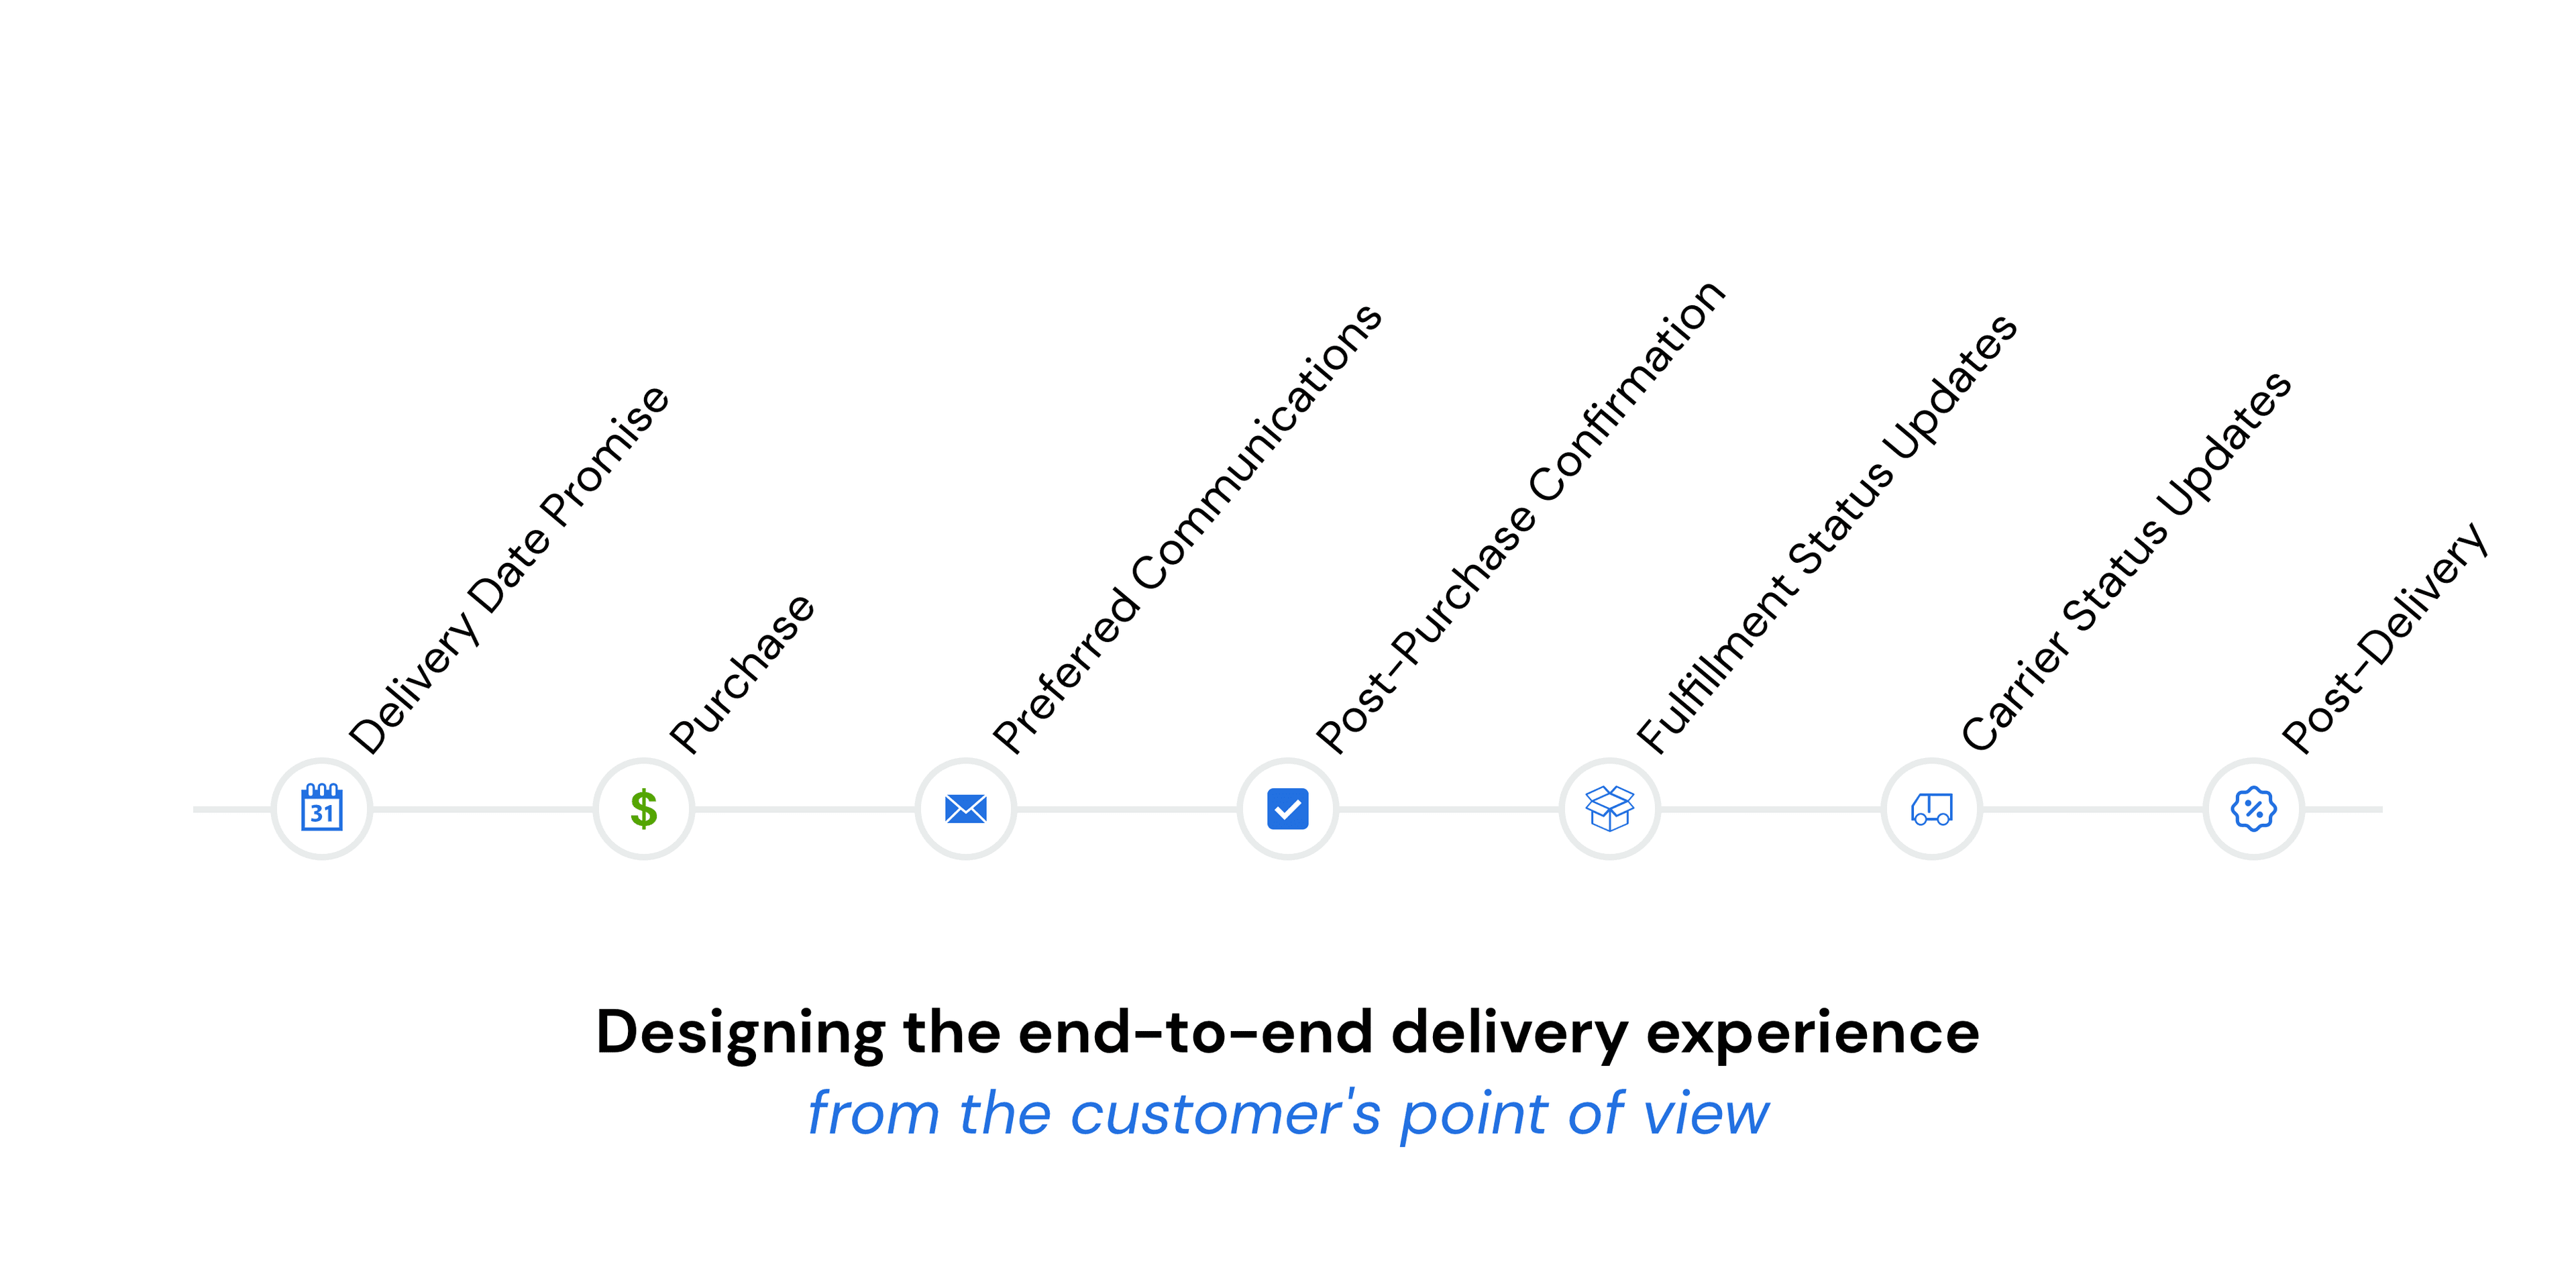 Product How to Design an End-to-End Customer Delivery Experience image